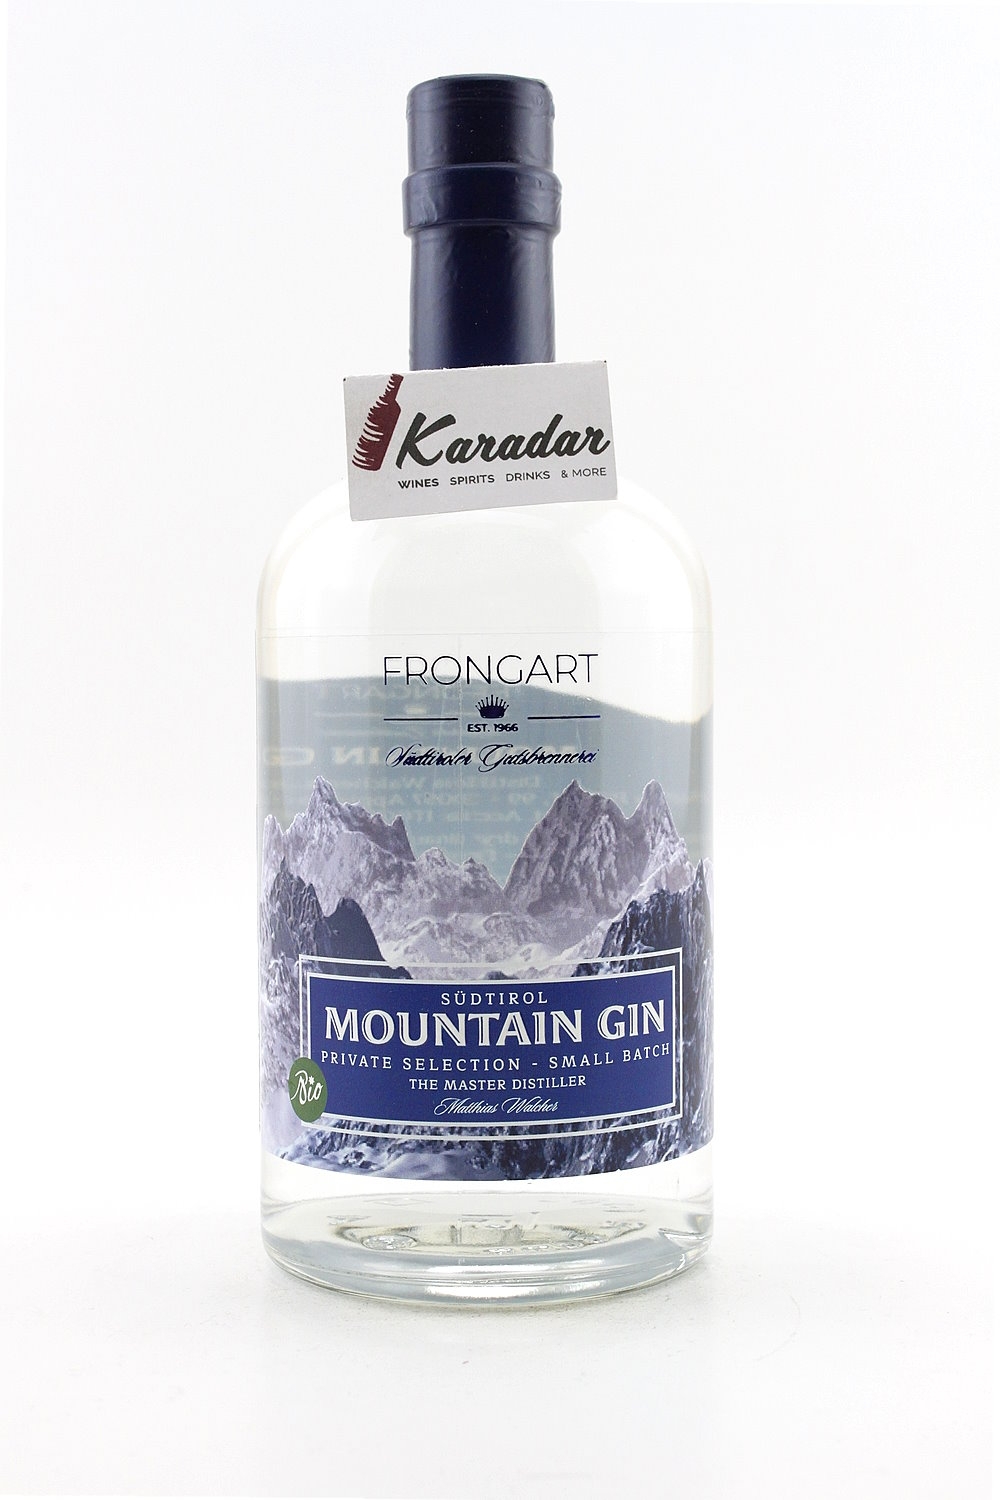 Frongart Mountain Gin Private Selection 40% vol. Walcher